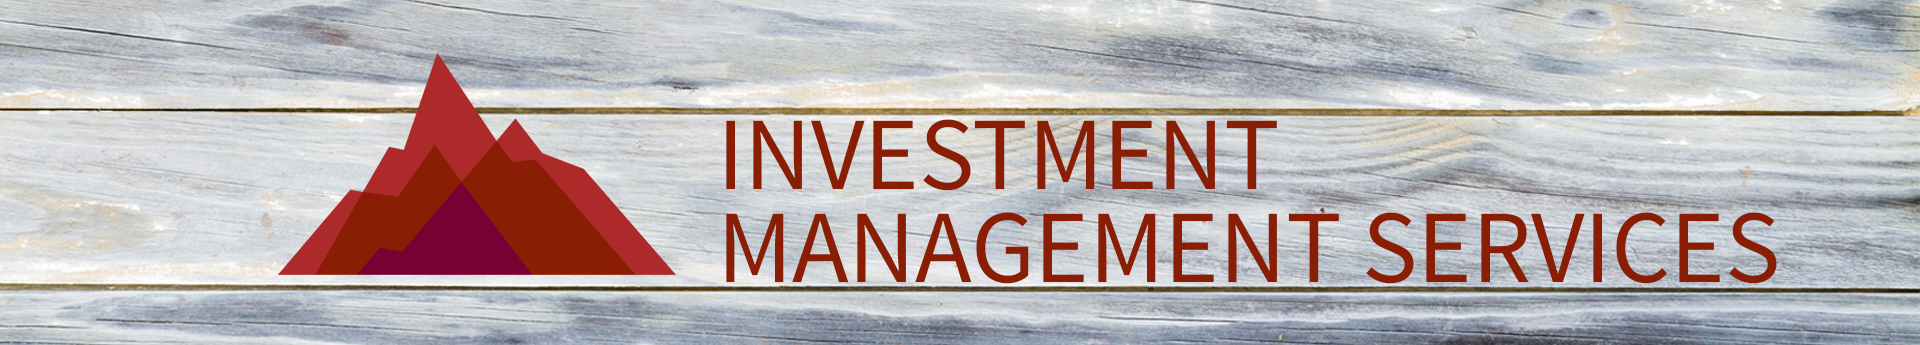 Investment-Management-Services